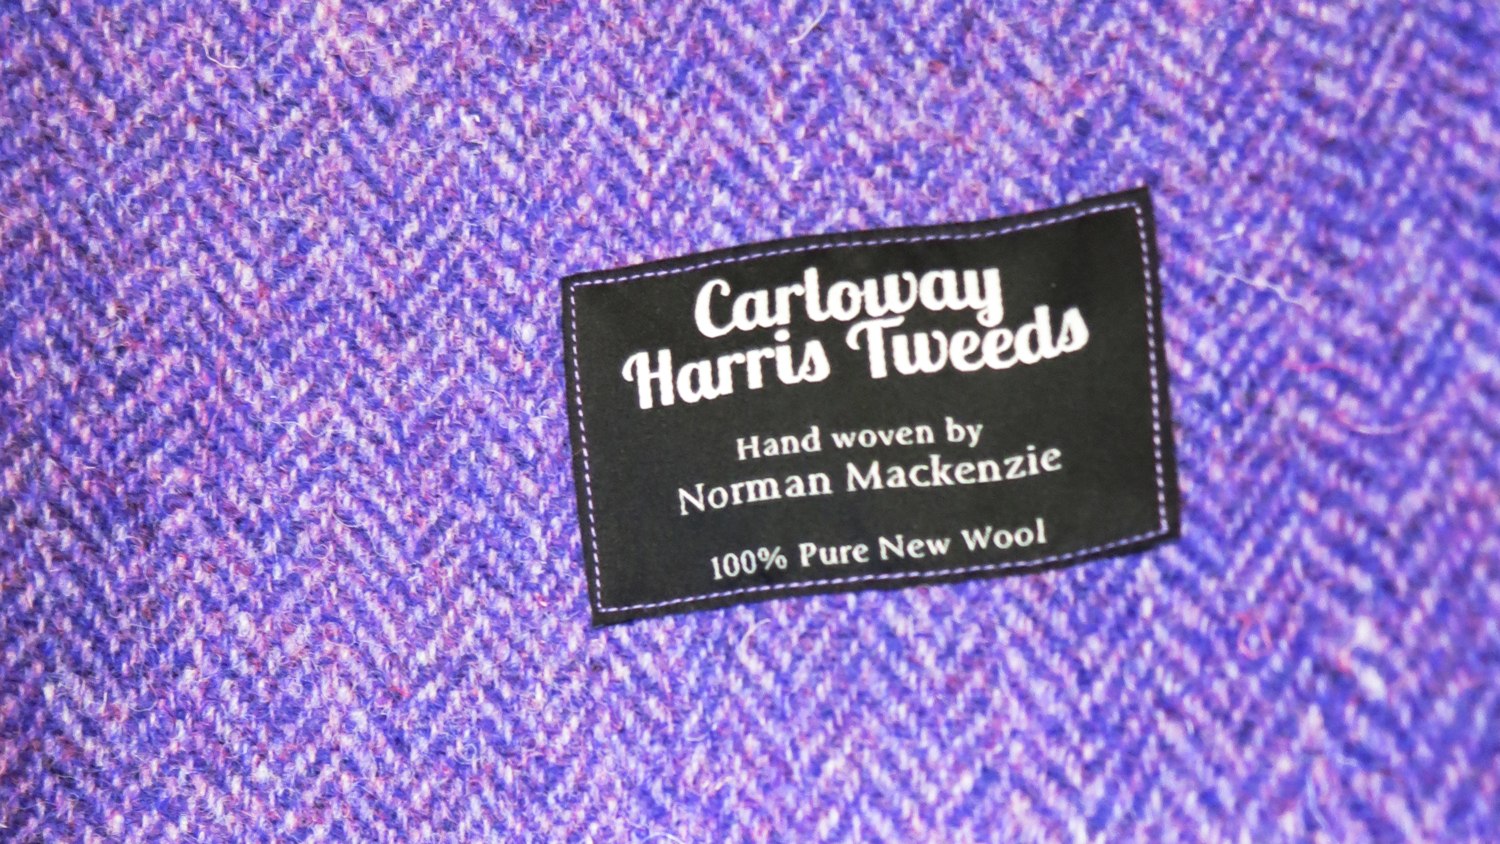 Harris Tweed, The Manliest Cloth on Earth - The Manual